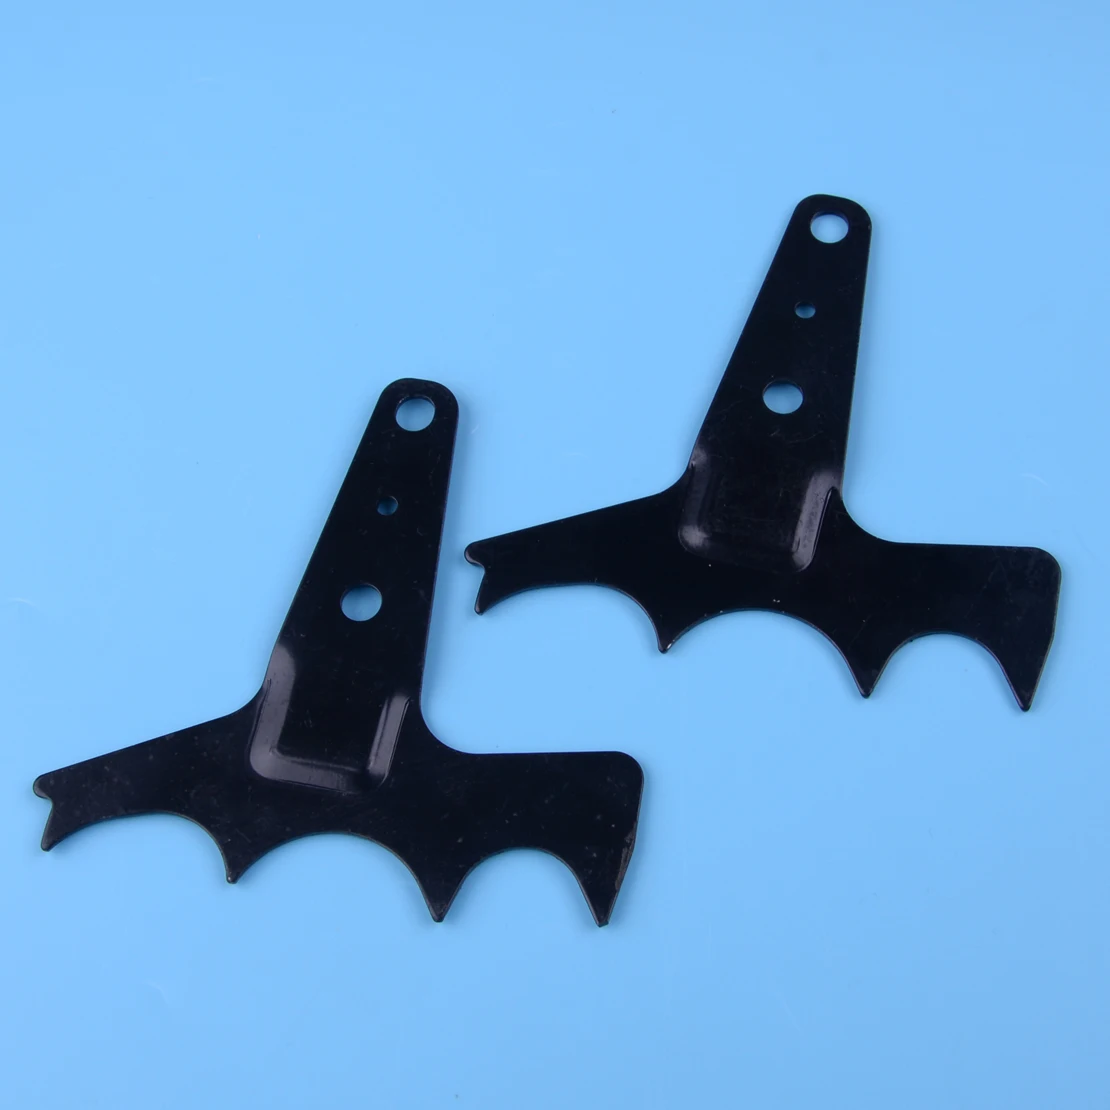 LETAOSK 2pcs Steel Felling Dog Bumper Spike Fit For Husqvarna 362 365 372 575 385 390 Chainsaw Spare Parts